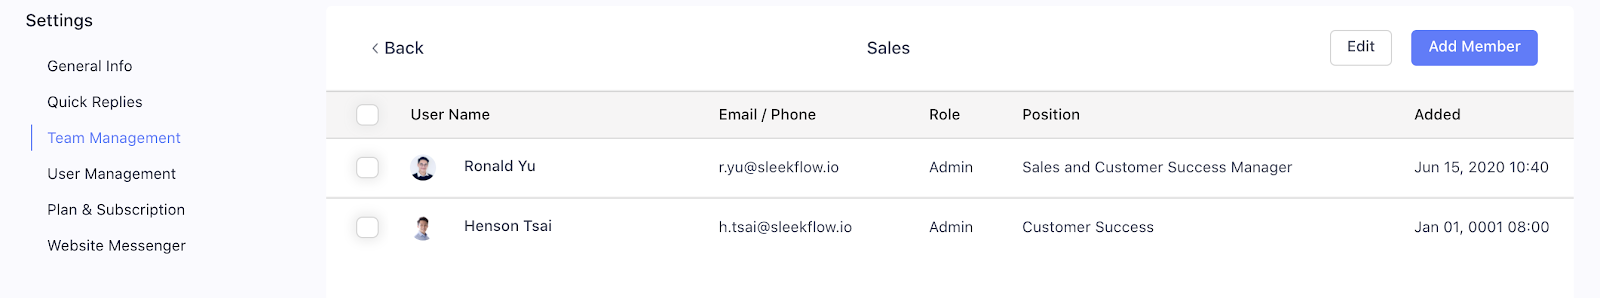 Adding SleekFlow members with different roles